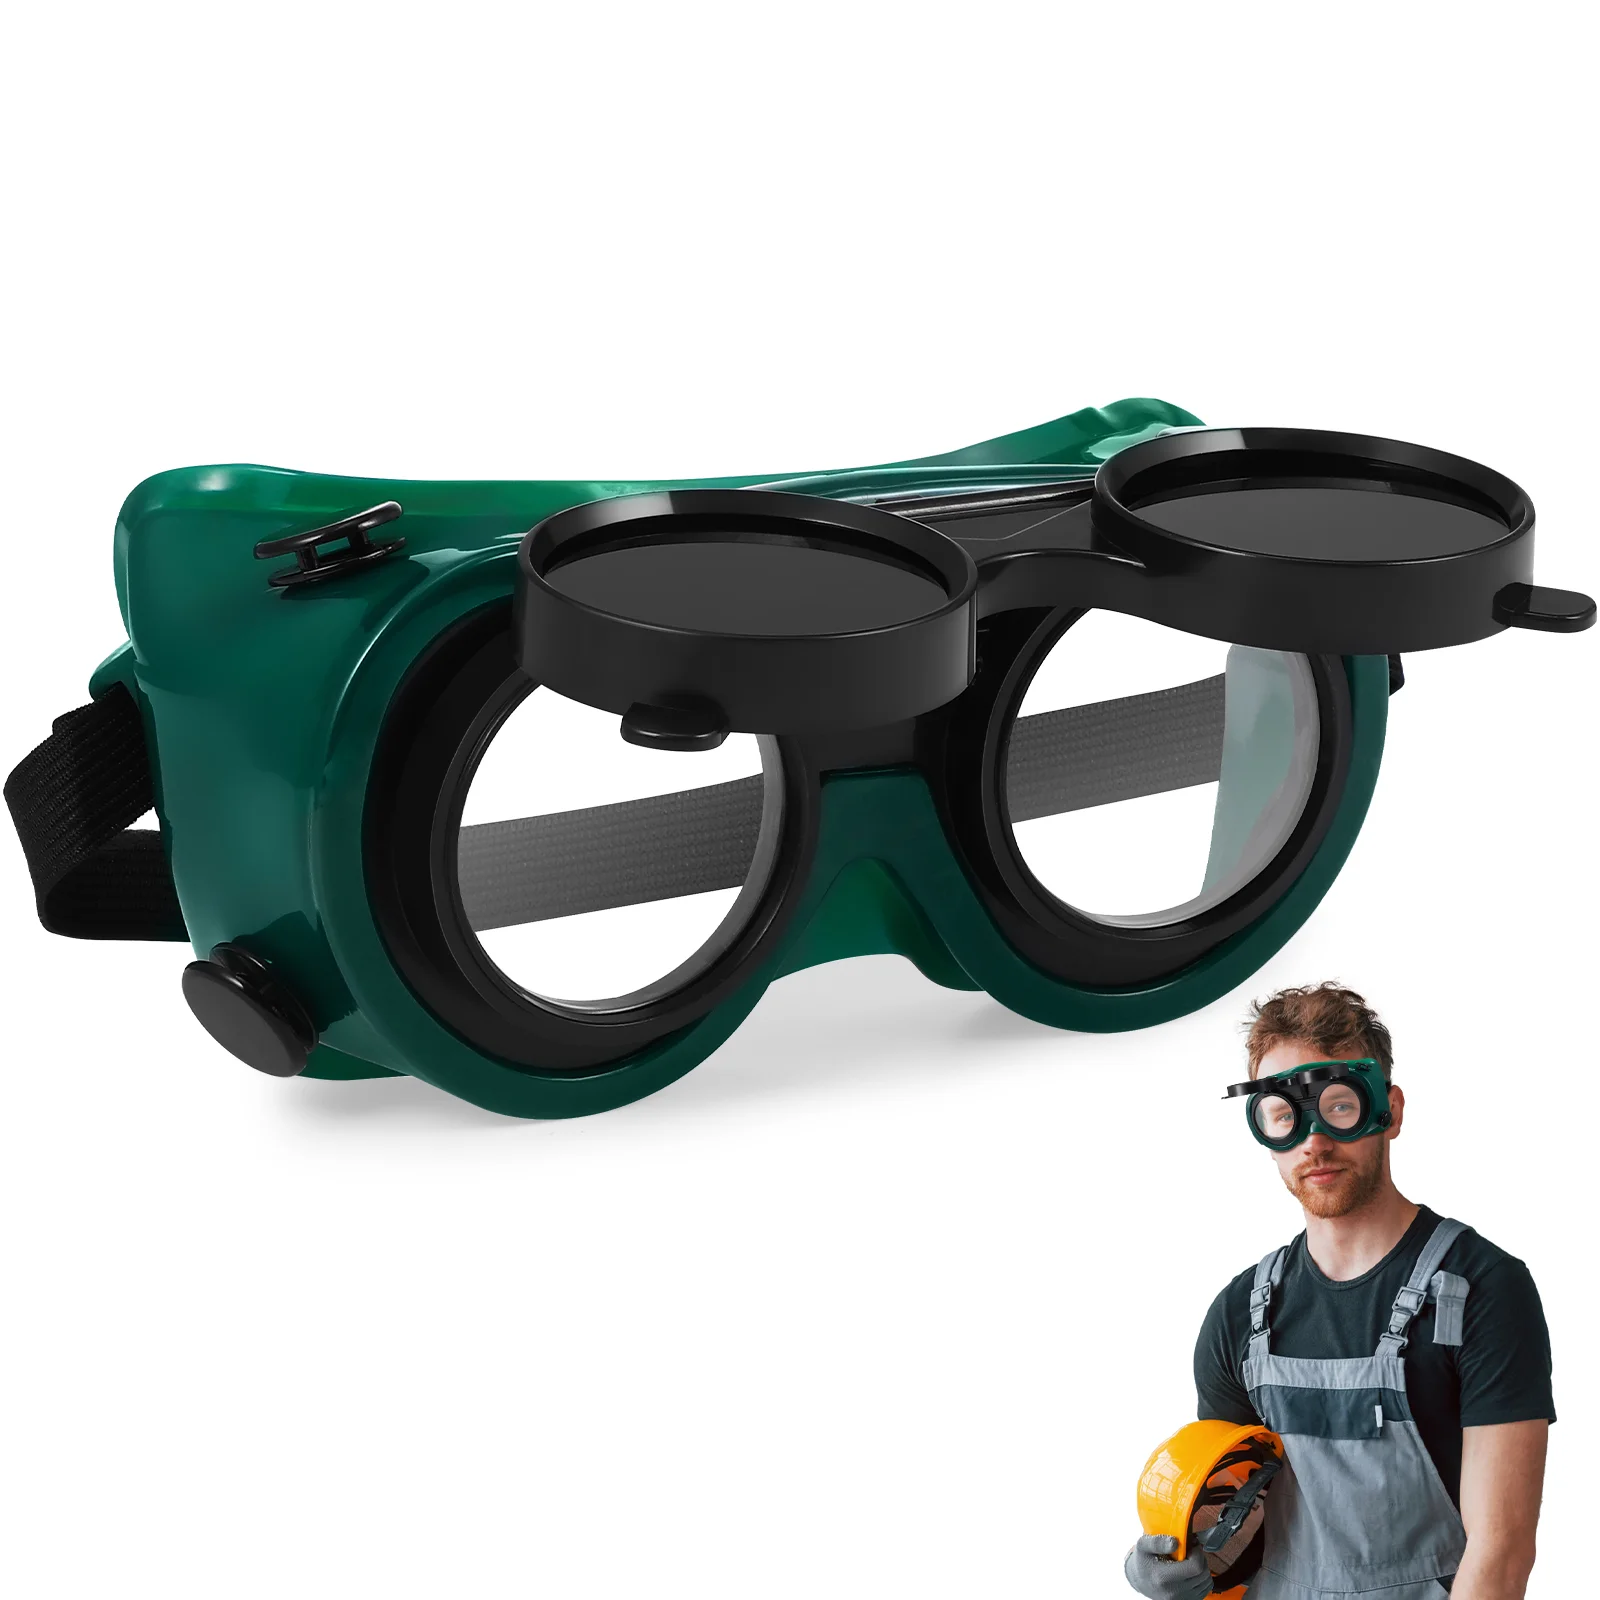 Anti-Glare Protective Welding Goggles With Flip Up Safety Protective Grinding Glasses Eclipse Spectacles Weld Accessories